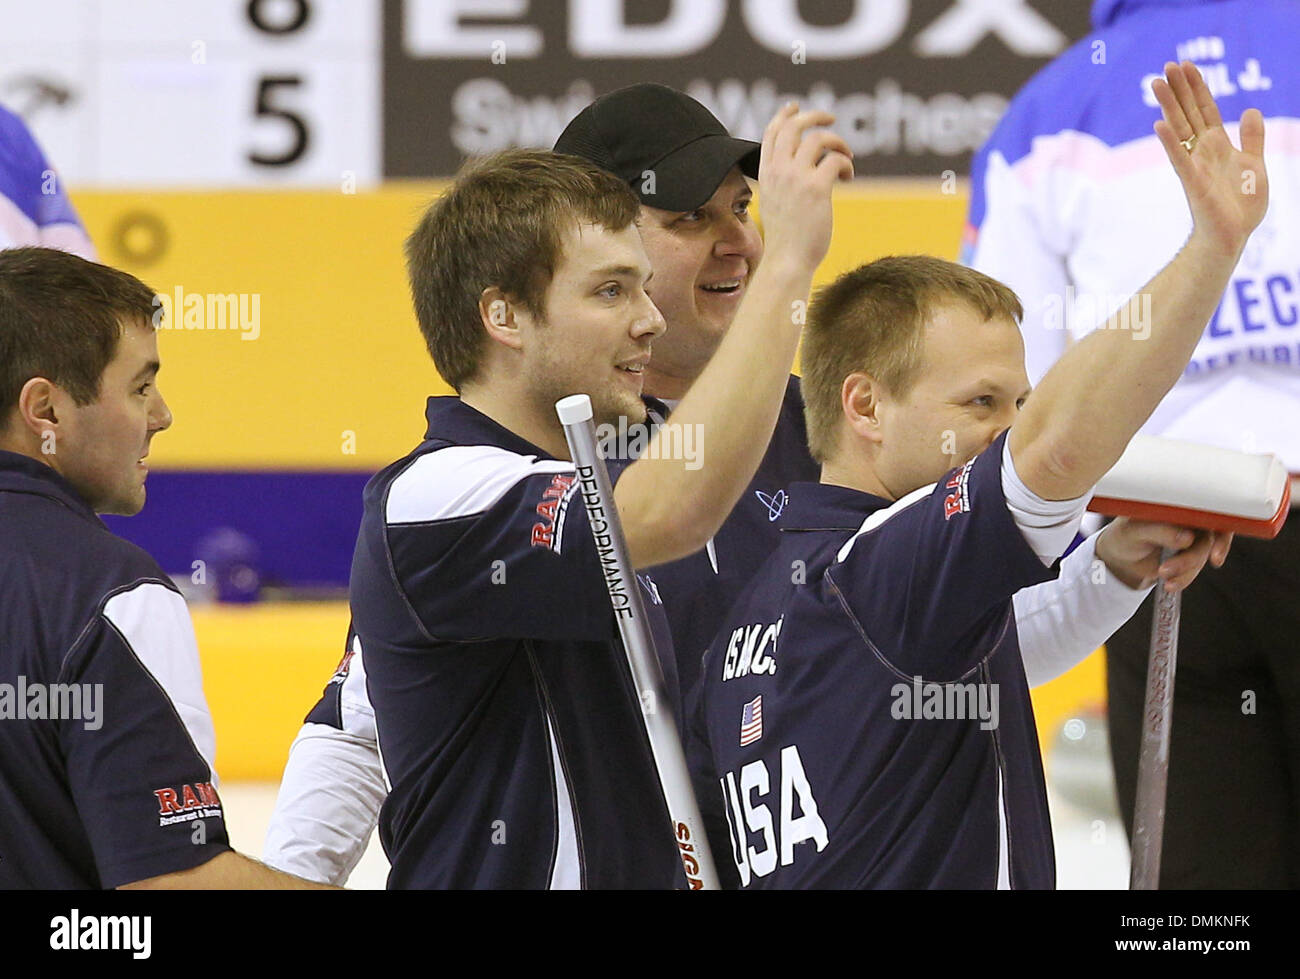 Fuessen, Germany. 15th Dec, 2013. The US Curler John Landsteiner (L-R), Jared Zezel, John Shuster and Jeff Isaacson cheer during the game against Czech for the qualification for the olympics at the Arena in Fuessen, Germany, 15 December 2013. Photo: Karl-Josef Hildenbrand/dpa/Alamy Live News Stock Photo